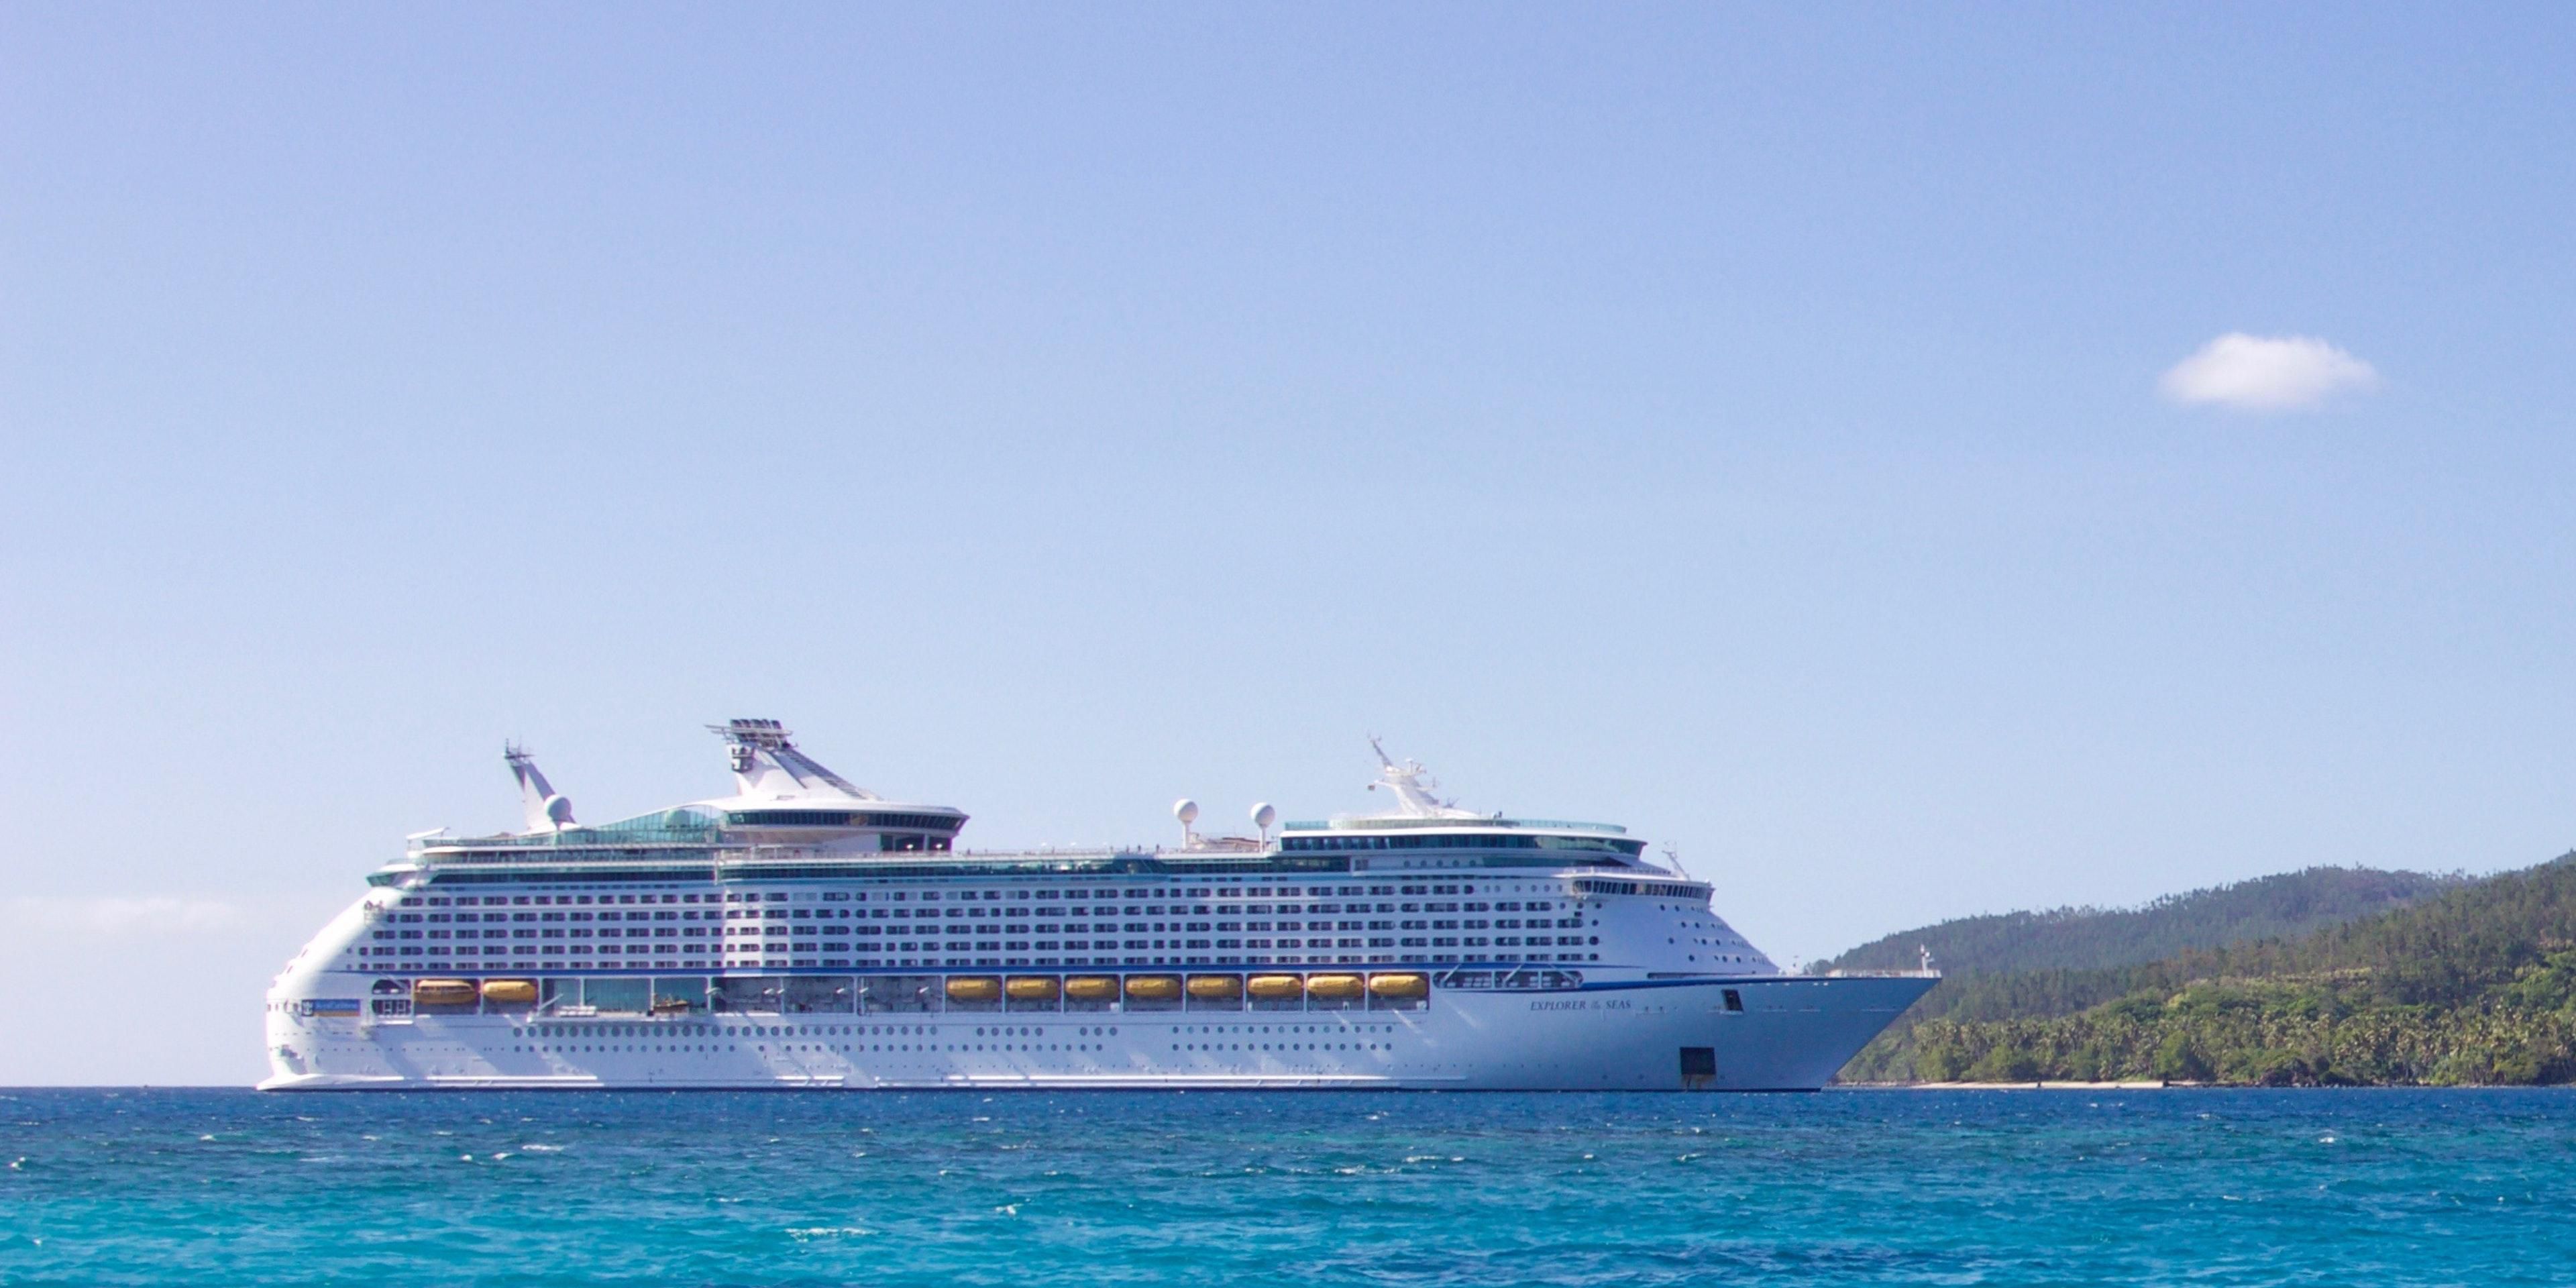 Our Hotel is 4 miles from the Cruise port featuring 6 vessels from 4 cruise lines including Carnival, Royal Caribbean, Norwegian & Celebrity. Complimentary transportation available at select times. 